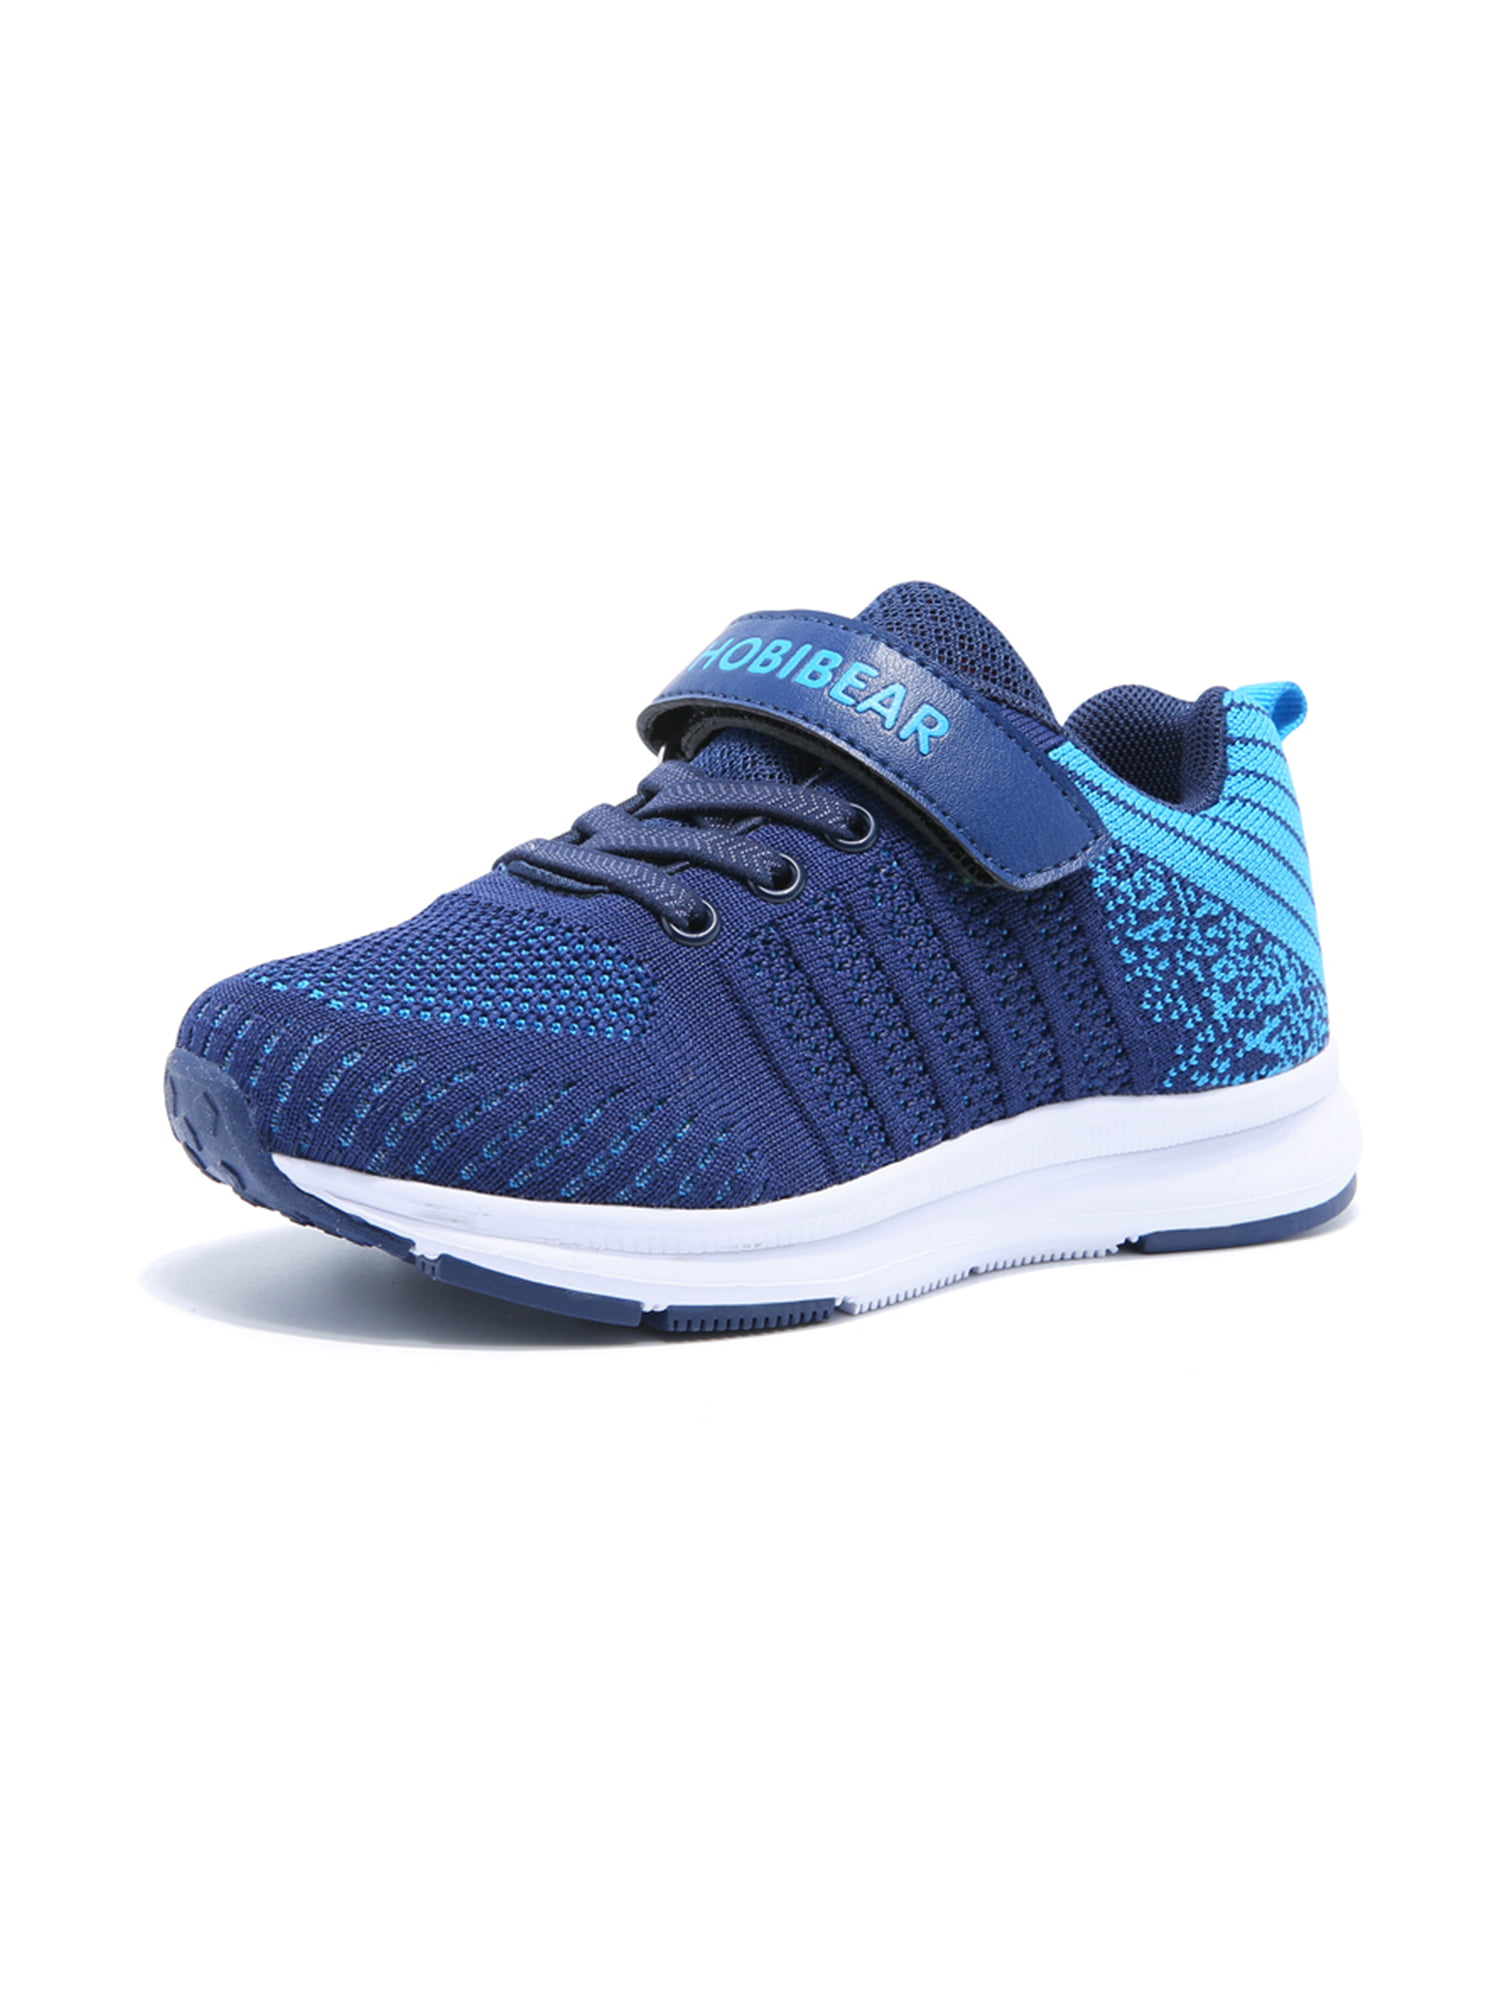 Kids Trainers Boys Girls Lightweight Running Shoes Breathable Hook-Loop Sport Shoes Childrend Athletic Sneakers for School Outdoor Casual 